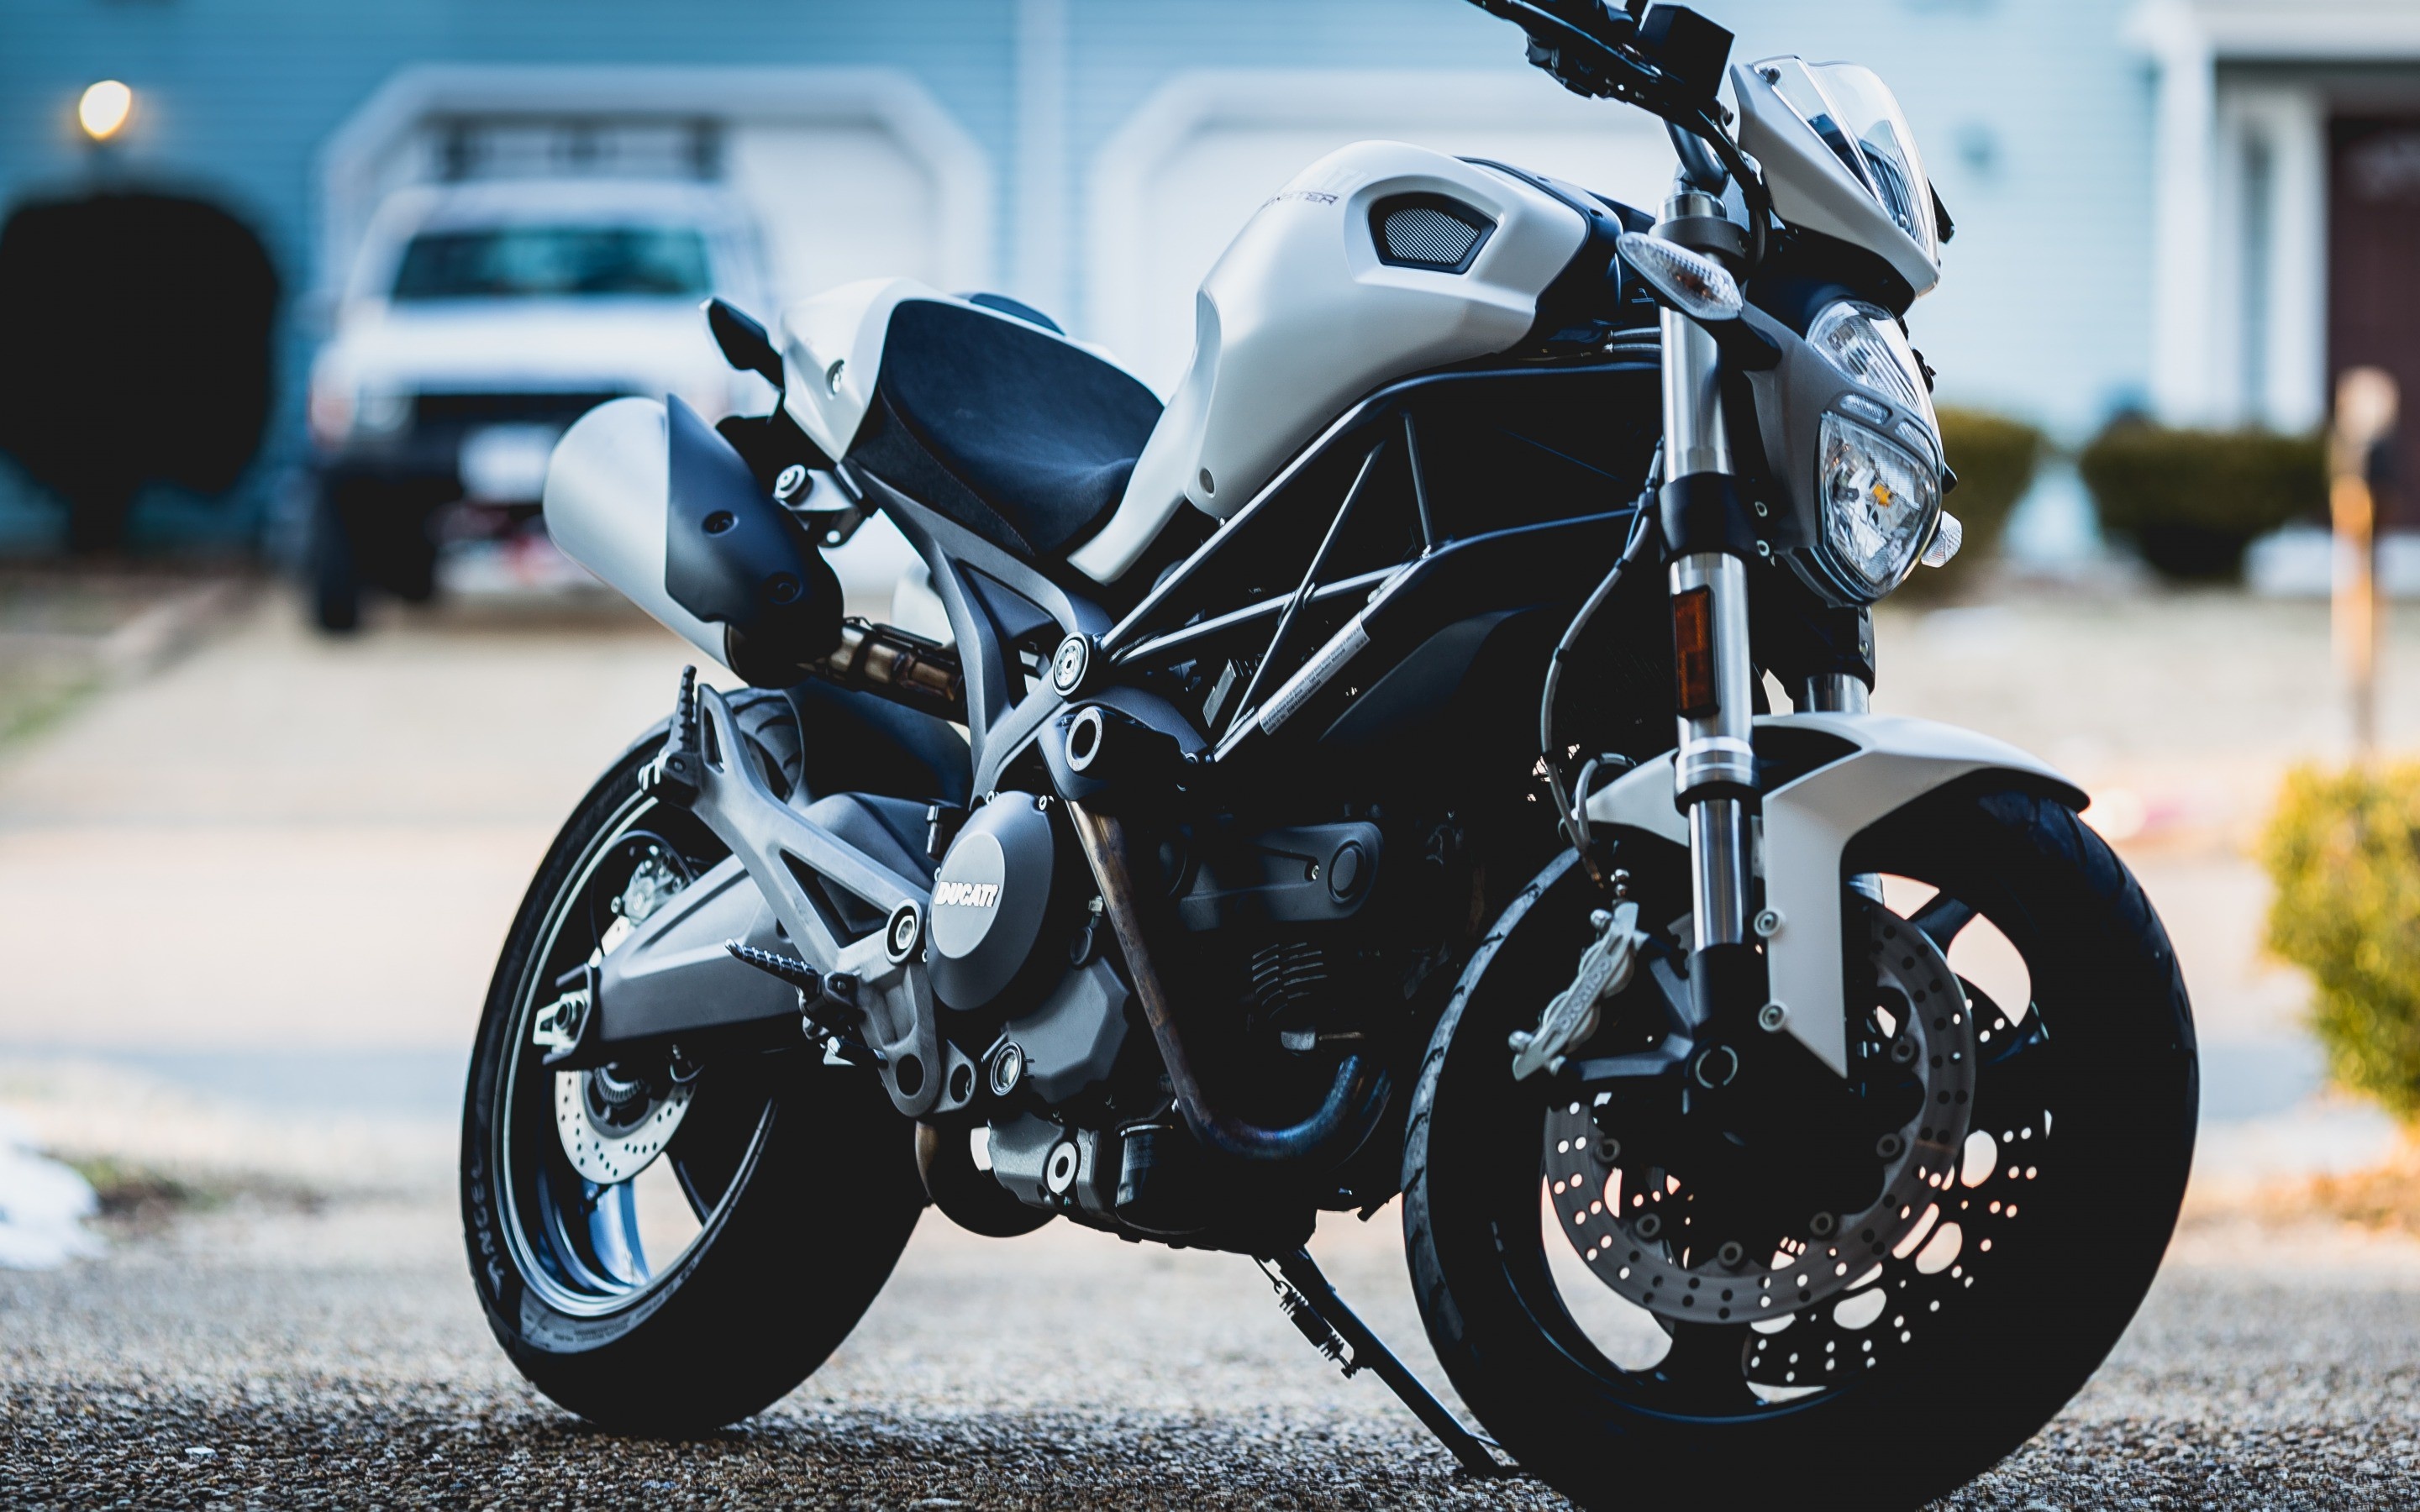 Superbike: A black-and-white Ducati street motorcycle, A popular racing and transportation model. 2880x1800 HD Wallpaper.